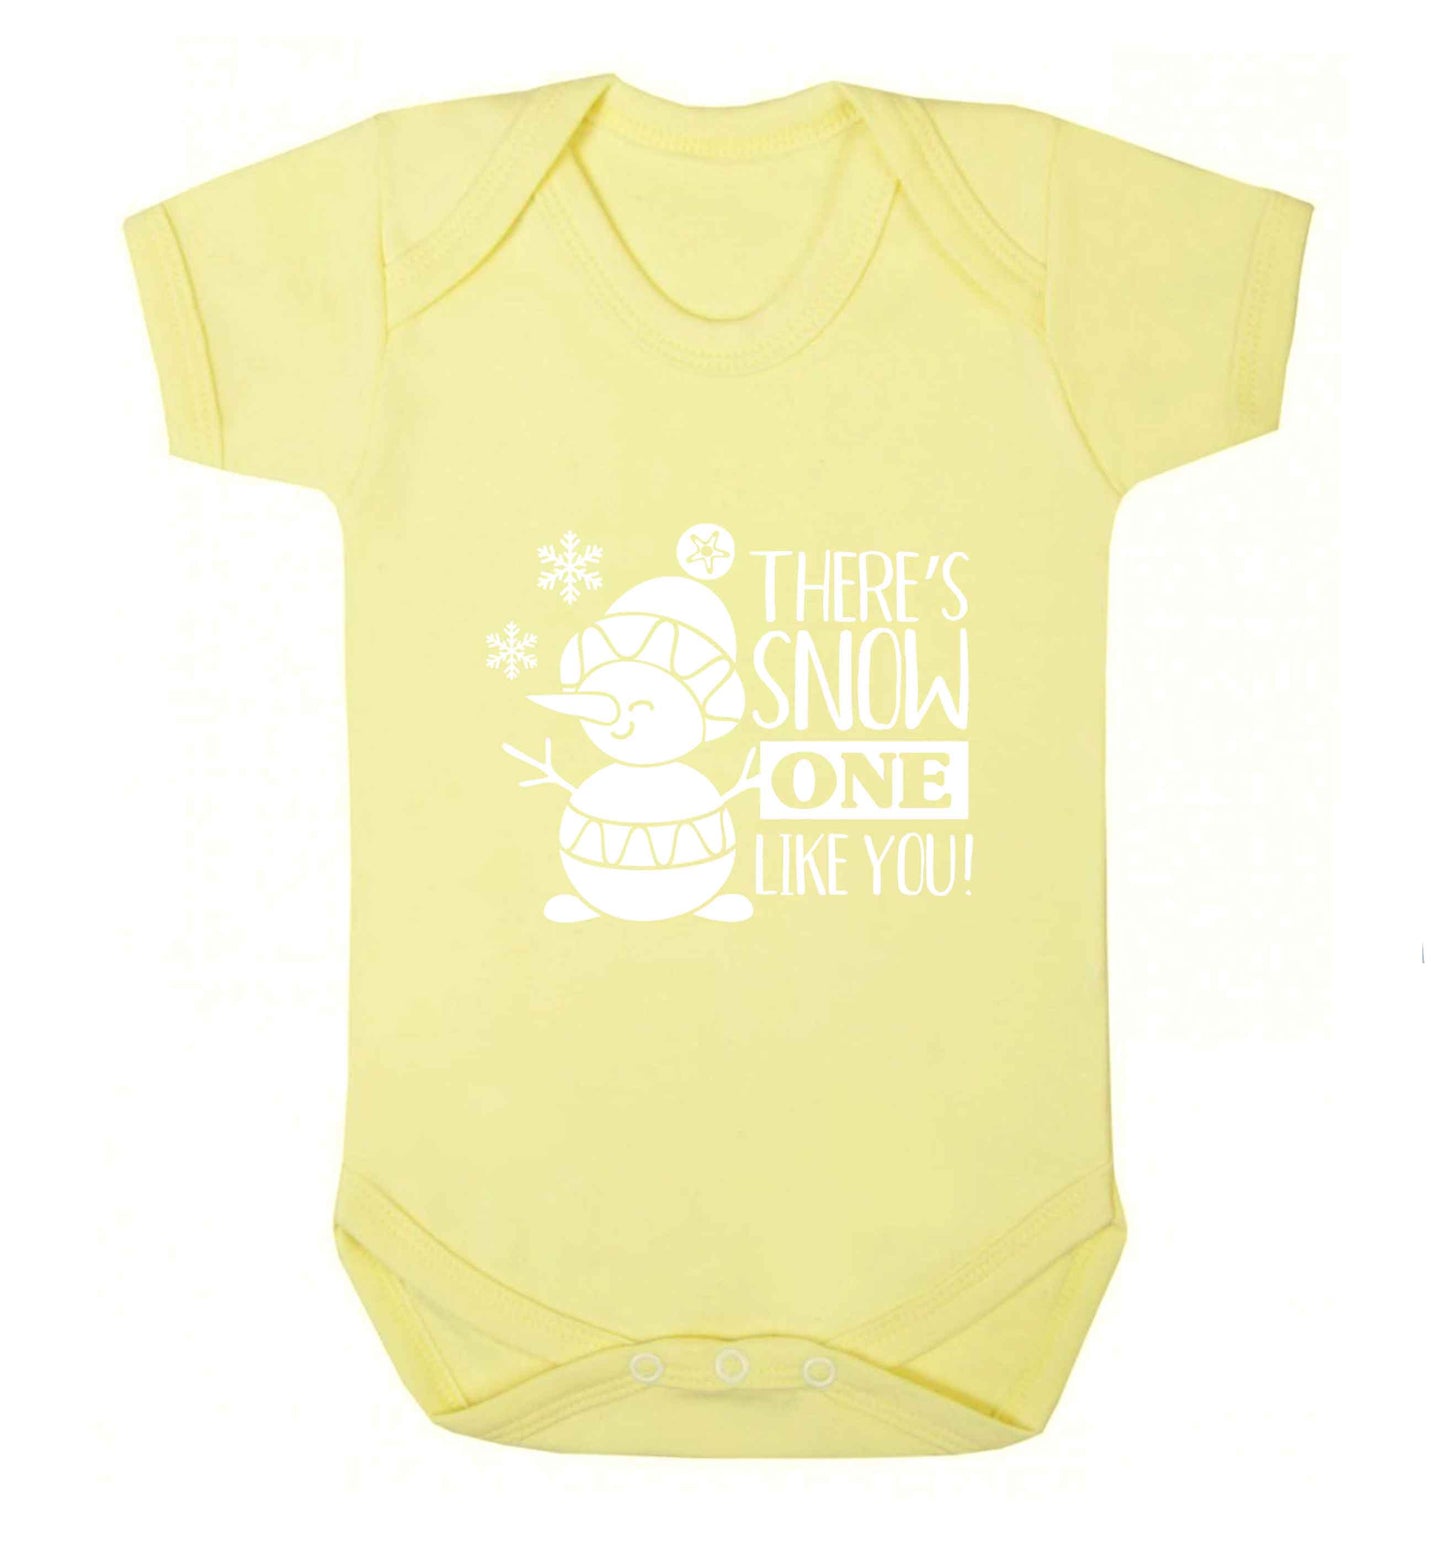 There's snow one like you baby vest pale yellow 18-24 months